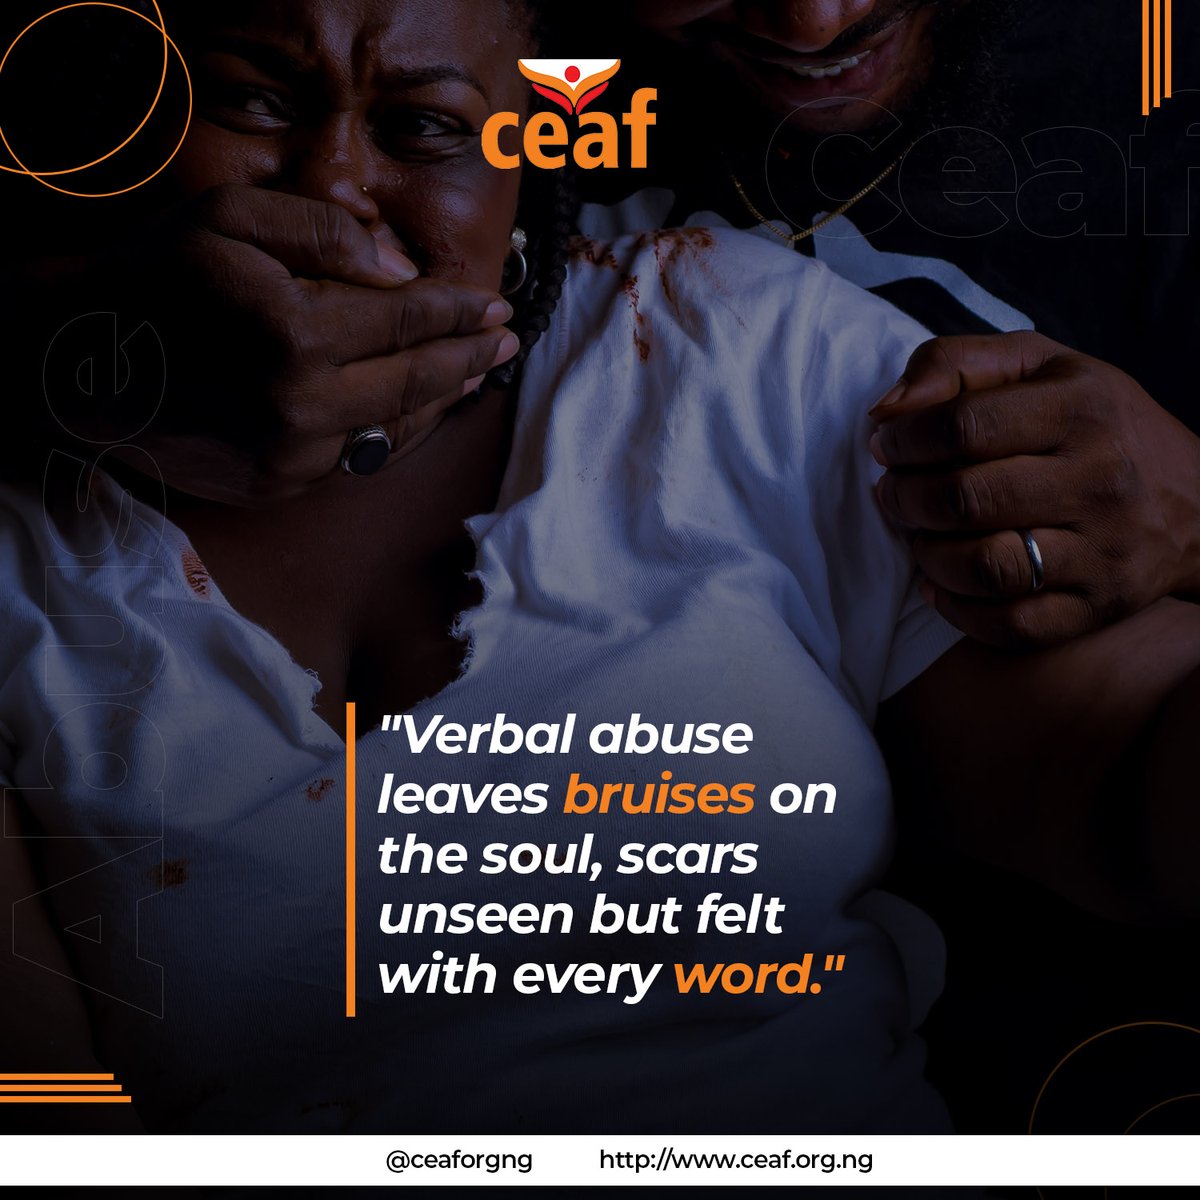 Verbal abuse can lead to emotional distress, anxiety, depression, and low self-esteem. Constant criticism and belittlement can erode one's sense of self-worth and self-confidence.
#ceaforgng #ceafproject #WomenEmpowerment #SayNoToDomesticViolence #LeaveToLive